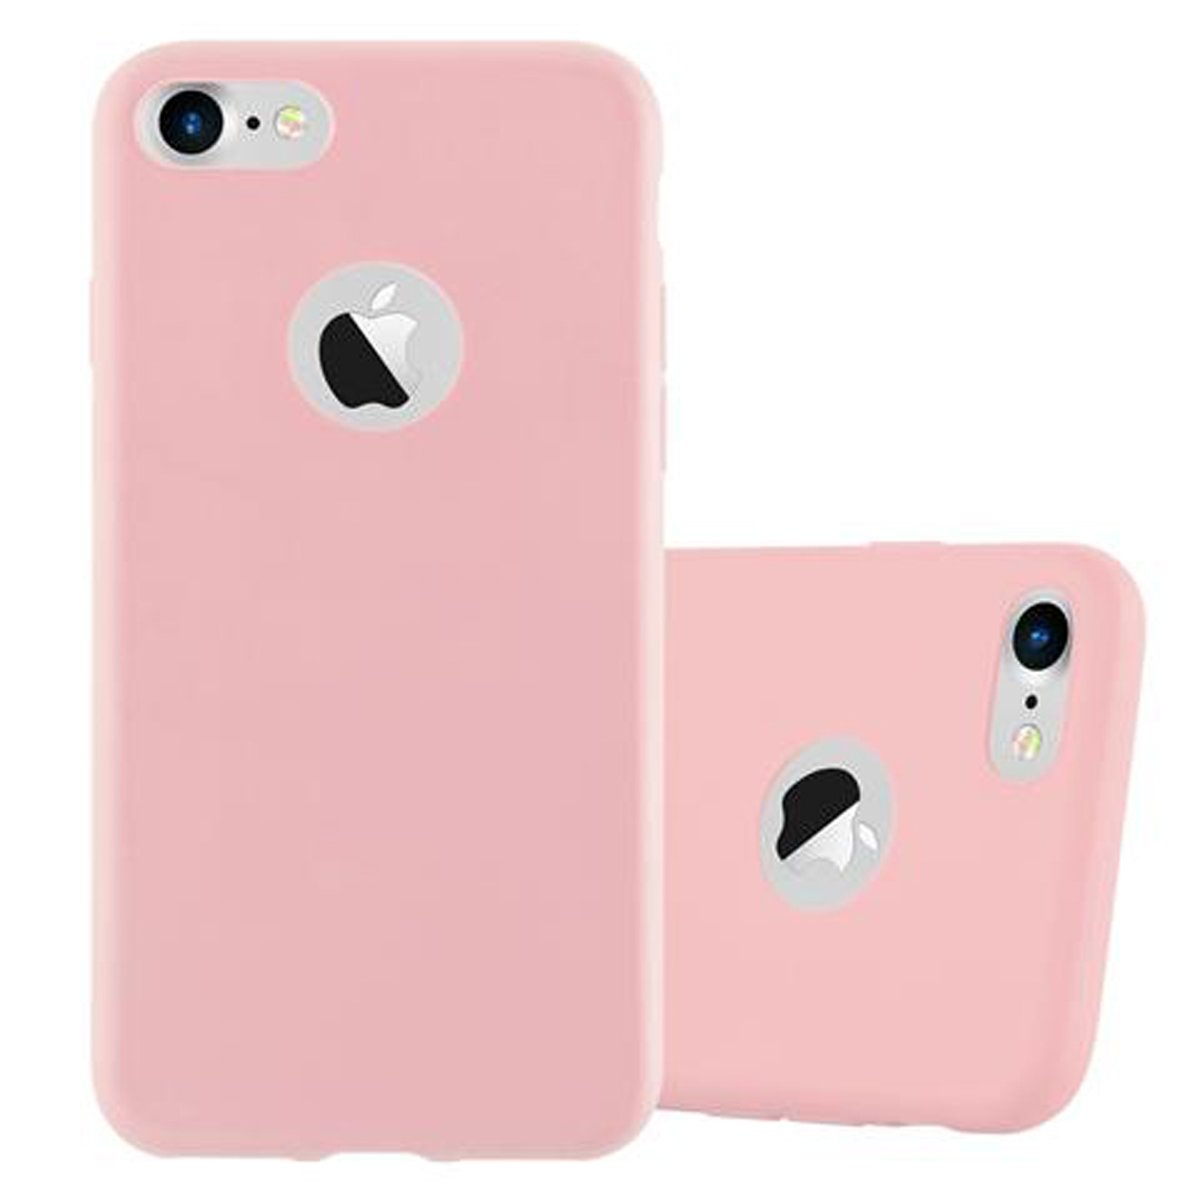 TPU / ROSA im iPhone SE / 7S Hülle / Apple, Style, CADORABO 2020, Candy 8 Backcover, 7 CANDY